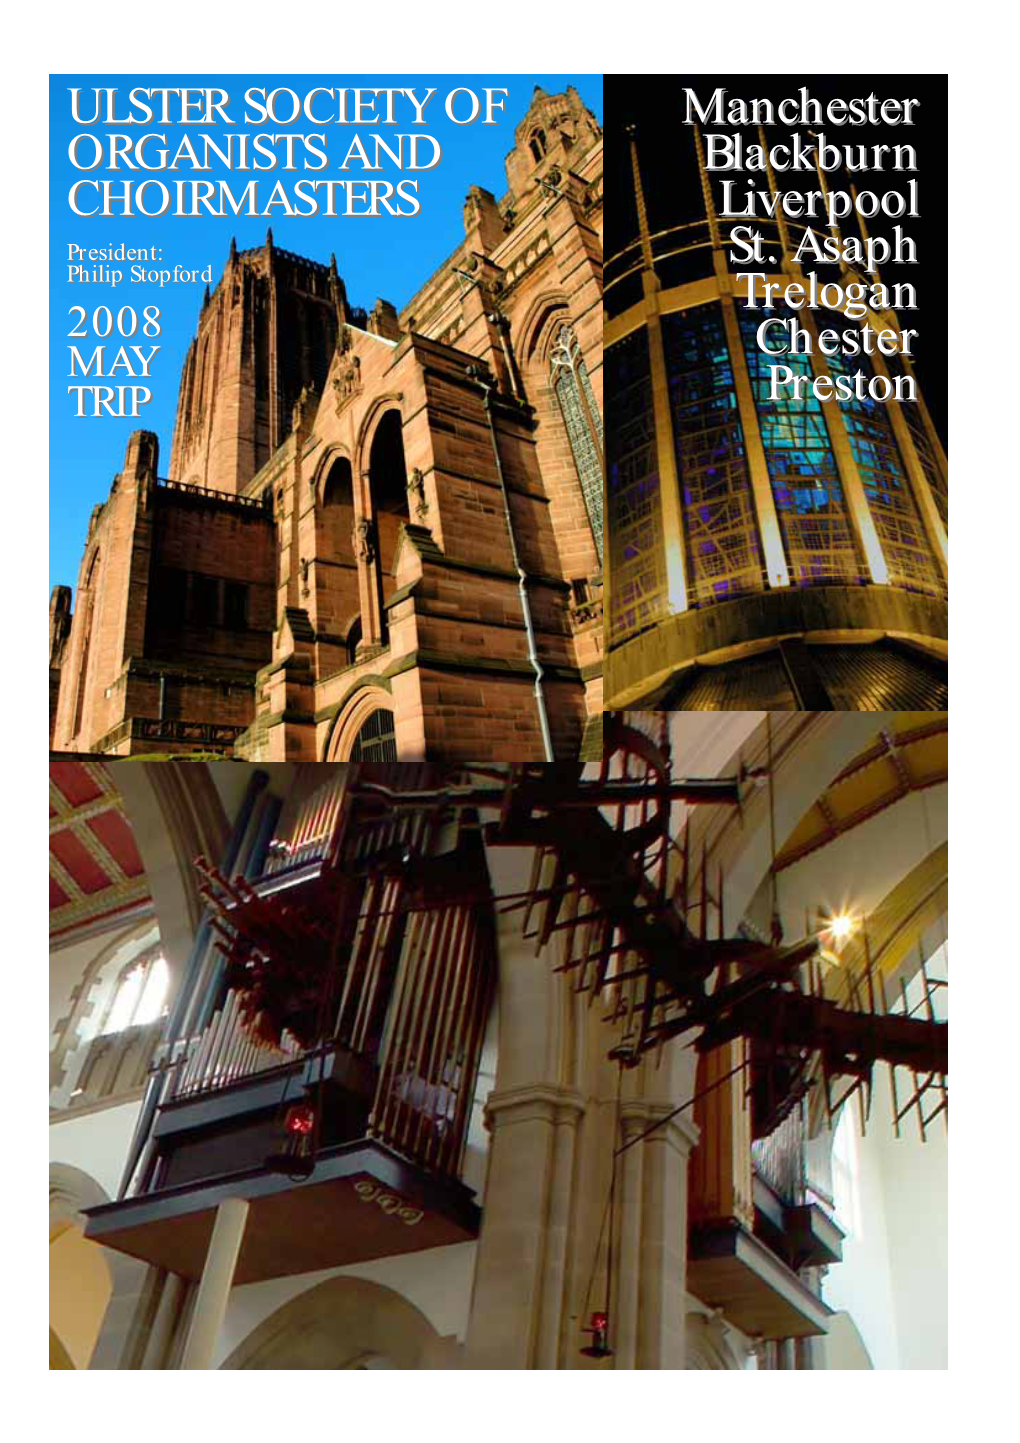 ULSTER SOCIETY of ORGANISTS and CHOIRMASTERS Manchester